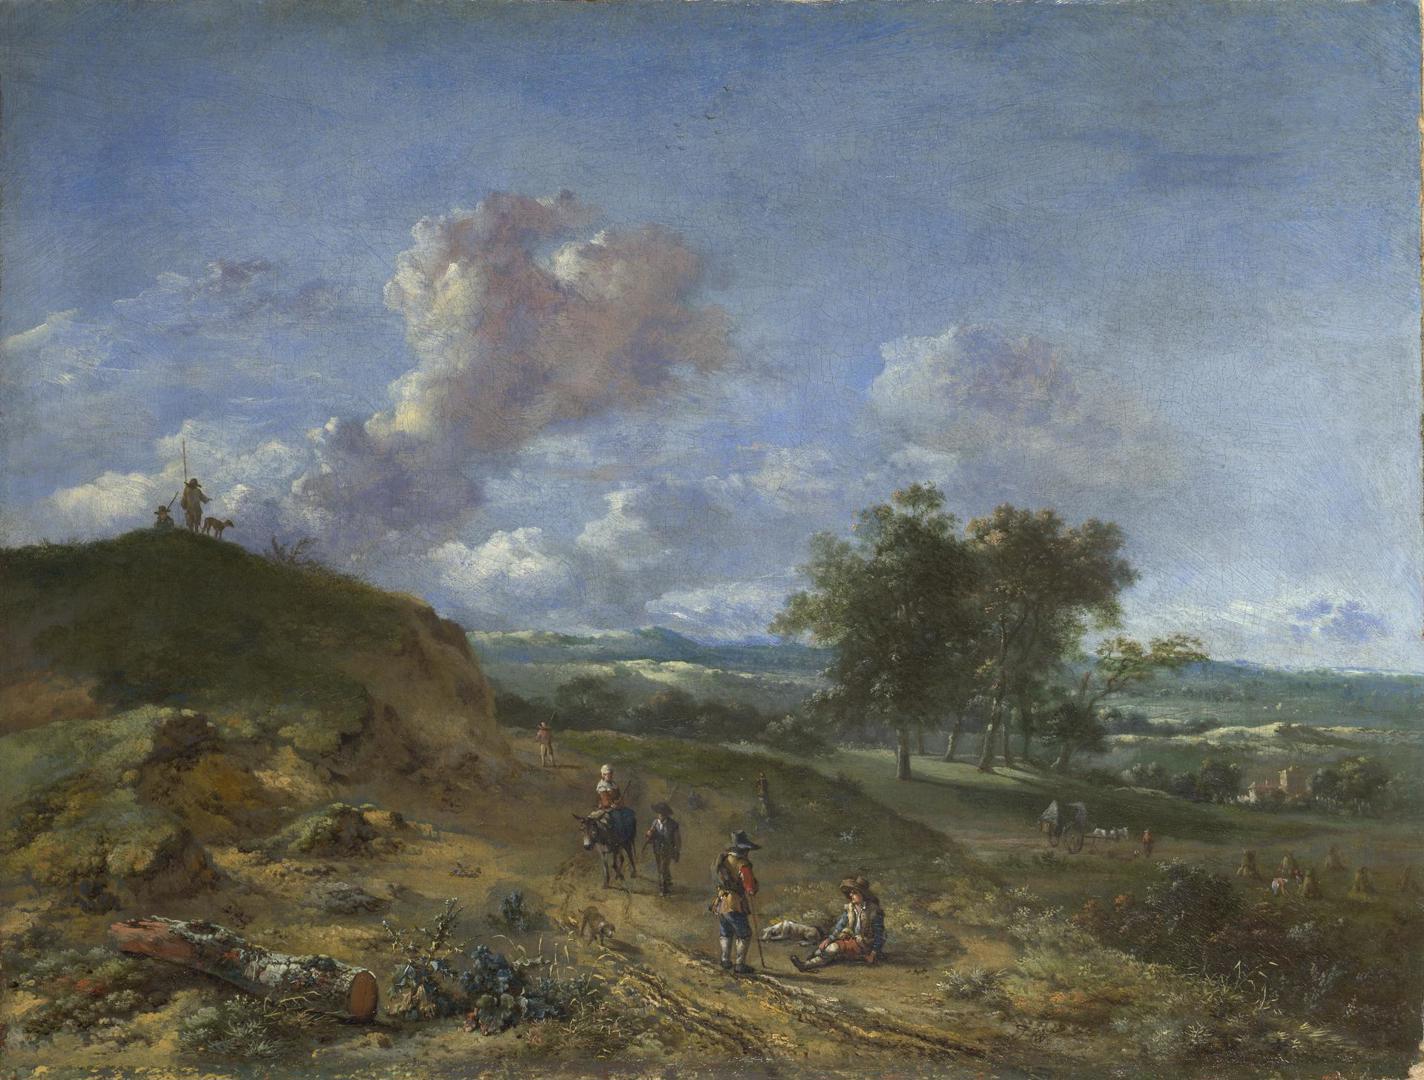 A Landscape with a High Dune and Peasants on a Road by Jan Wijnants